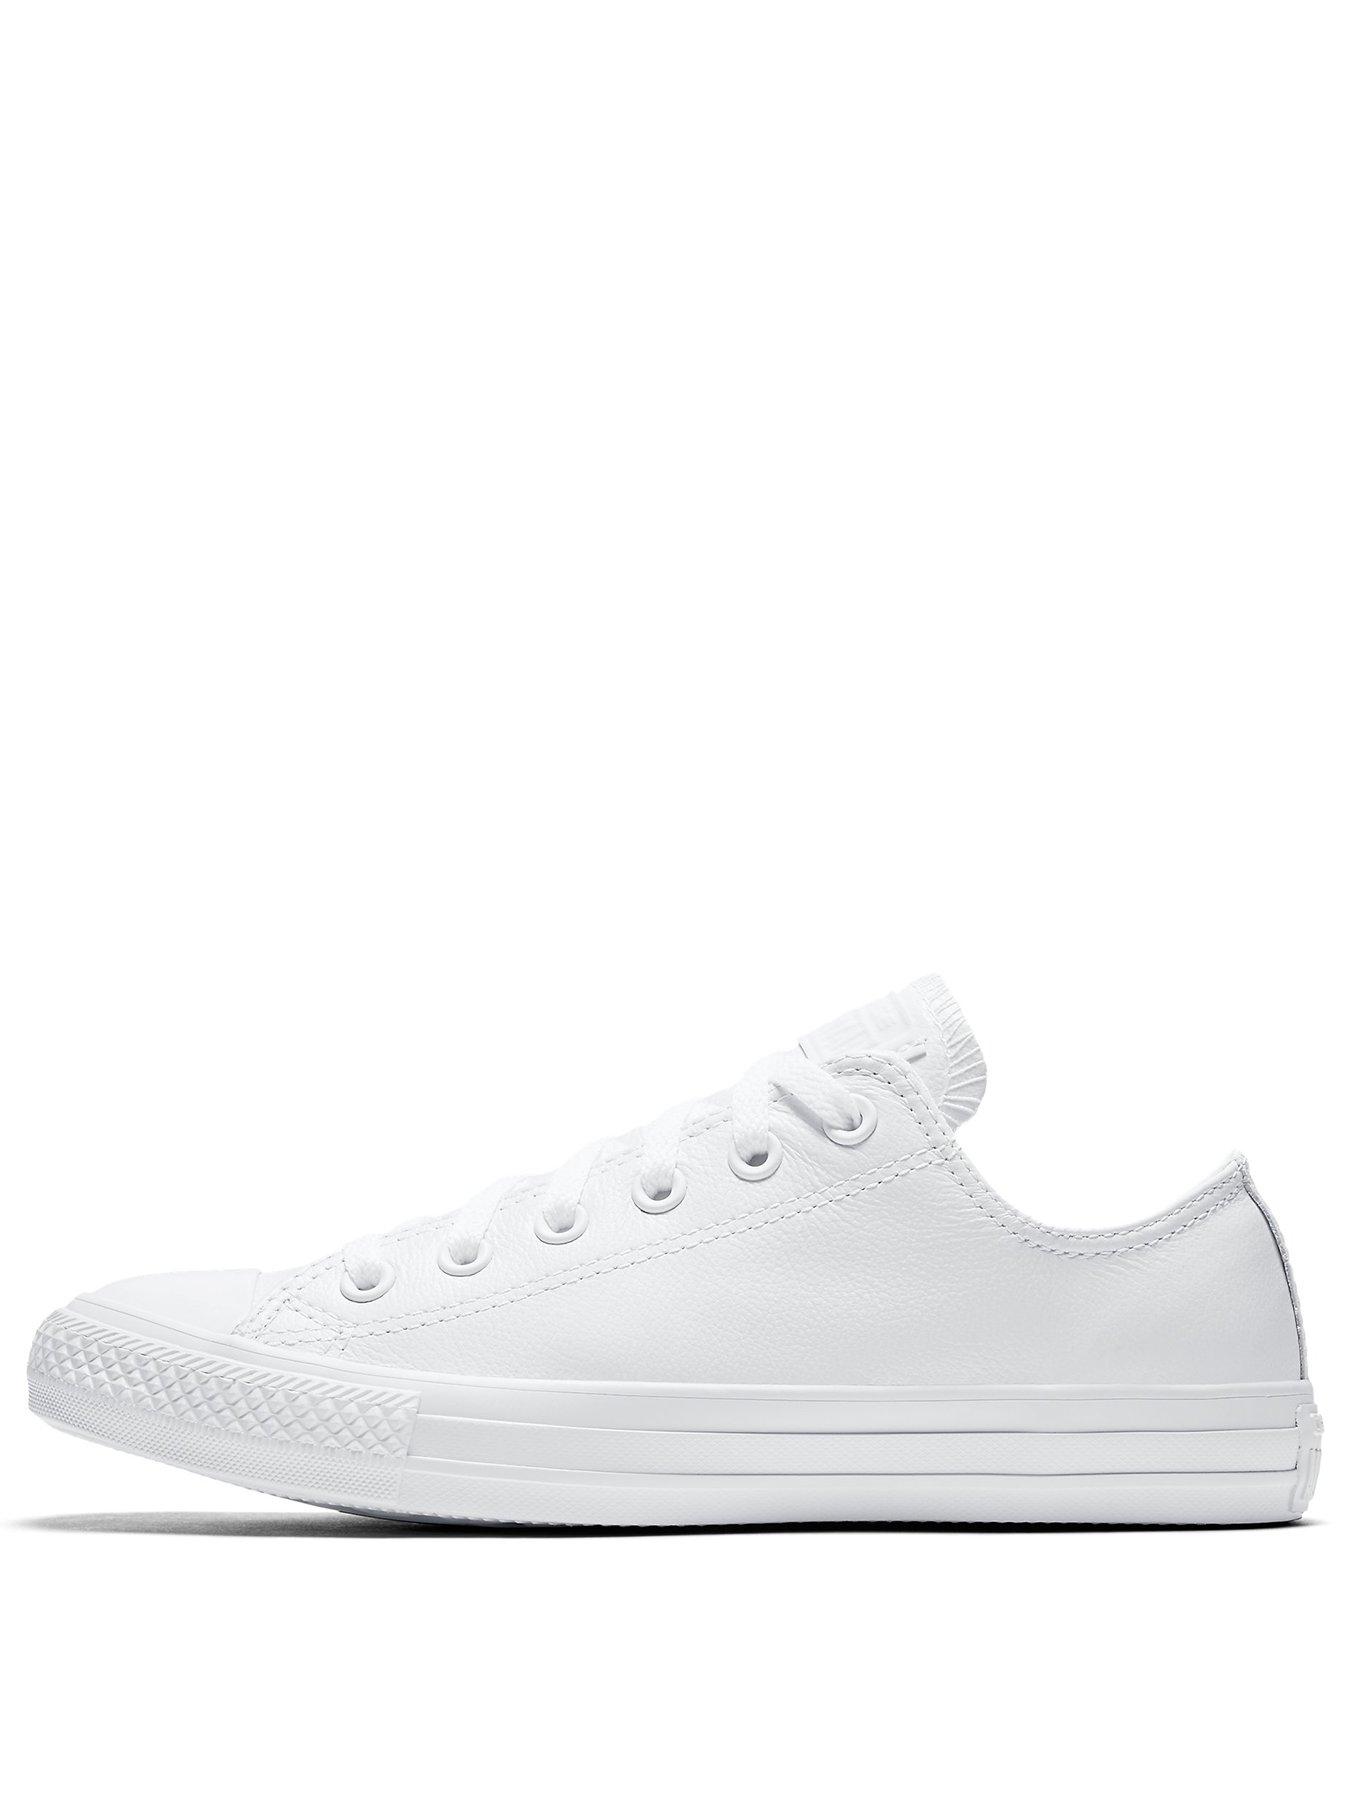 converse online xbox one